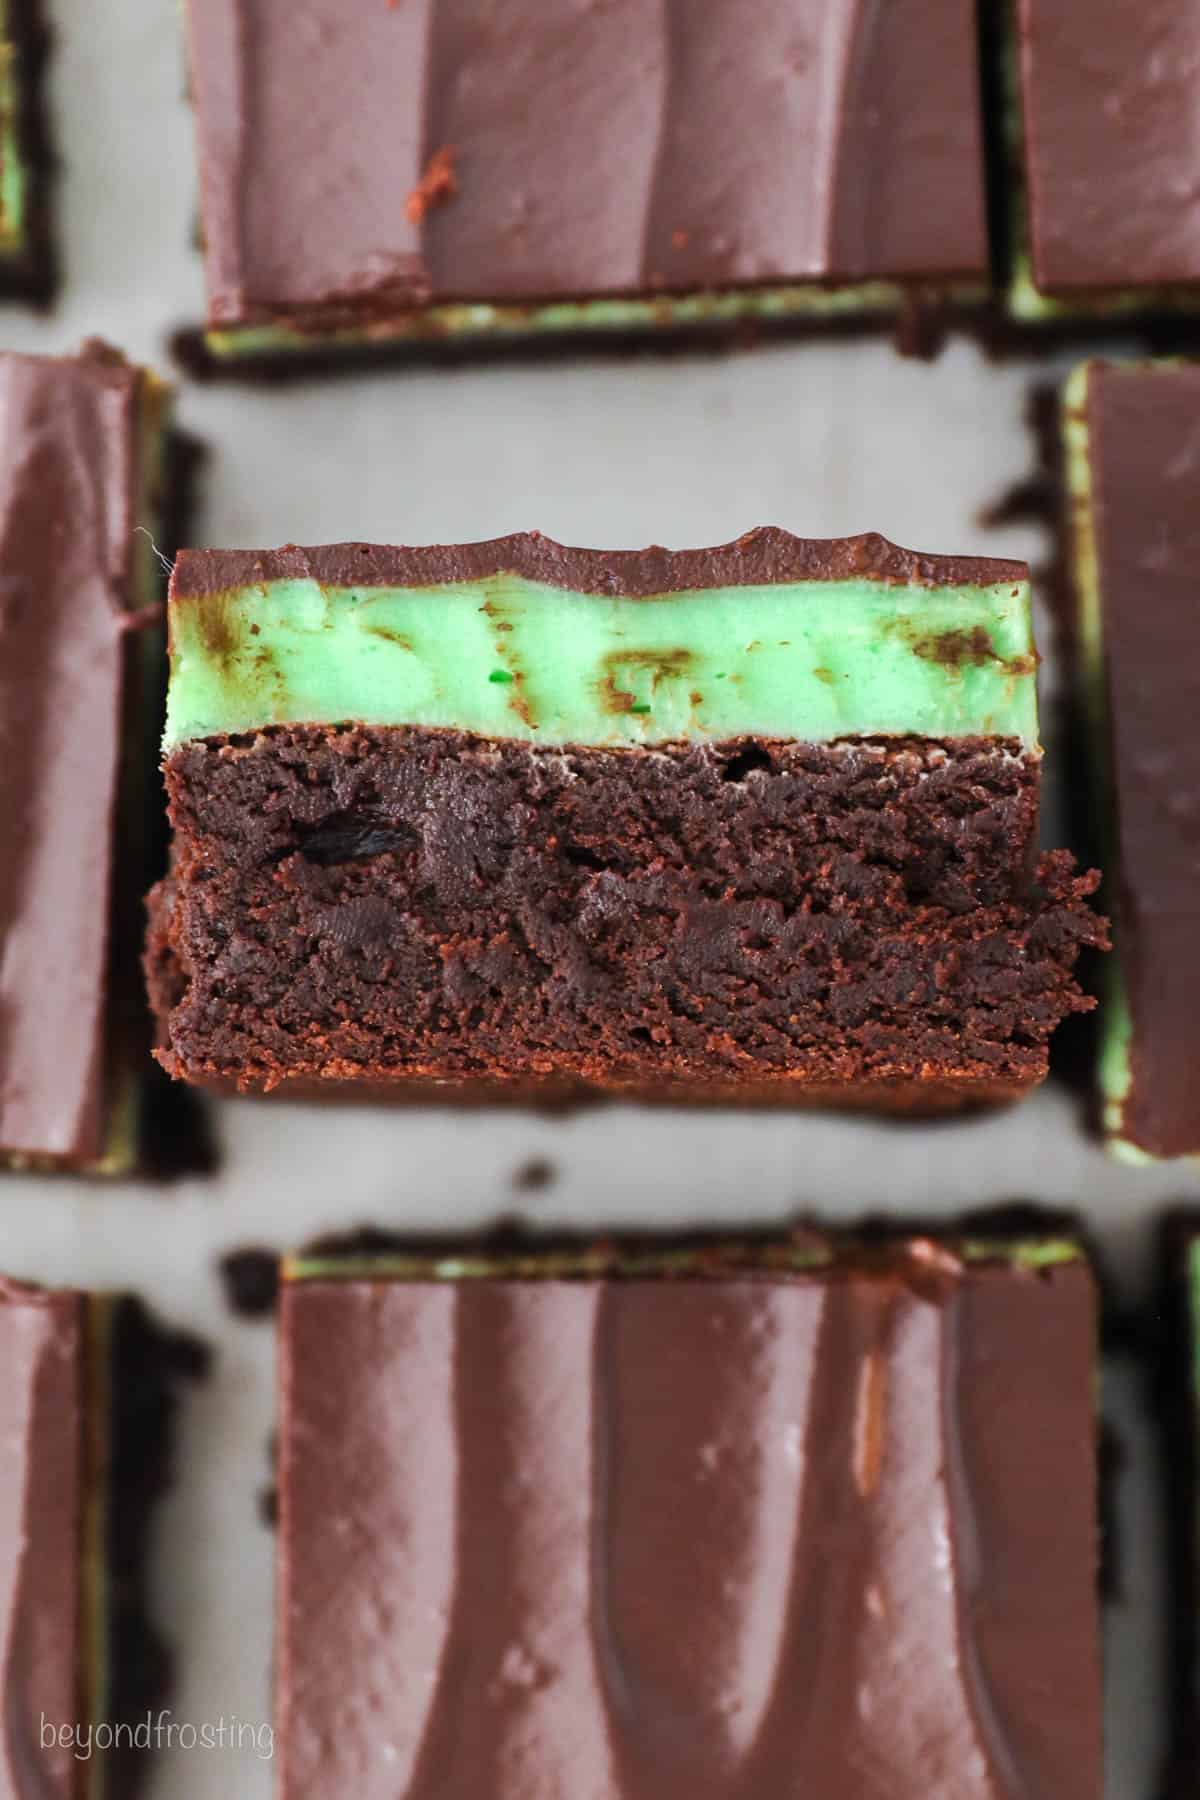 Overhead view of a mint chocolate brownie turned on its side to reveal the mint chocolate layers.